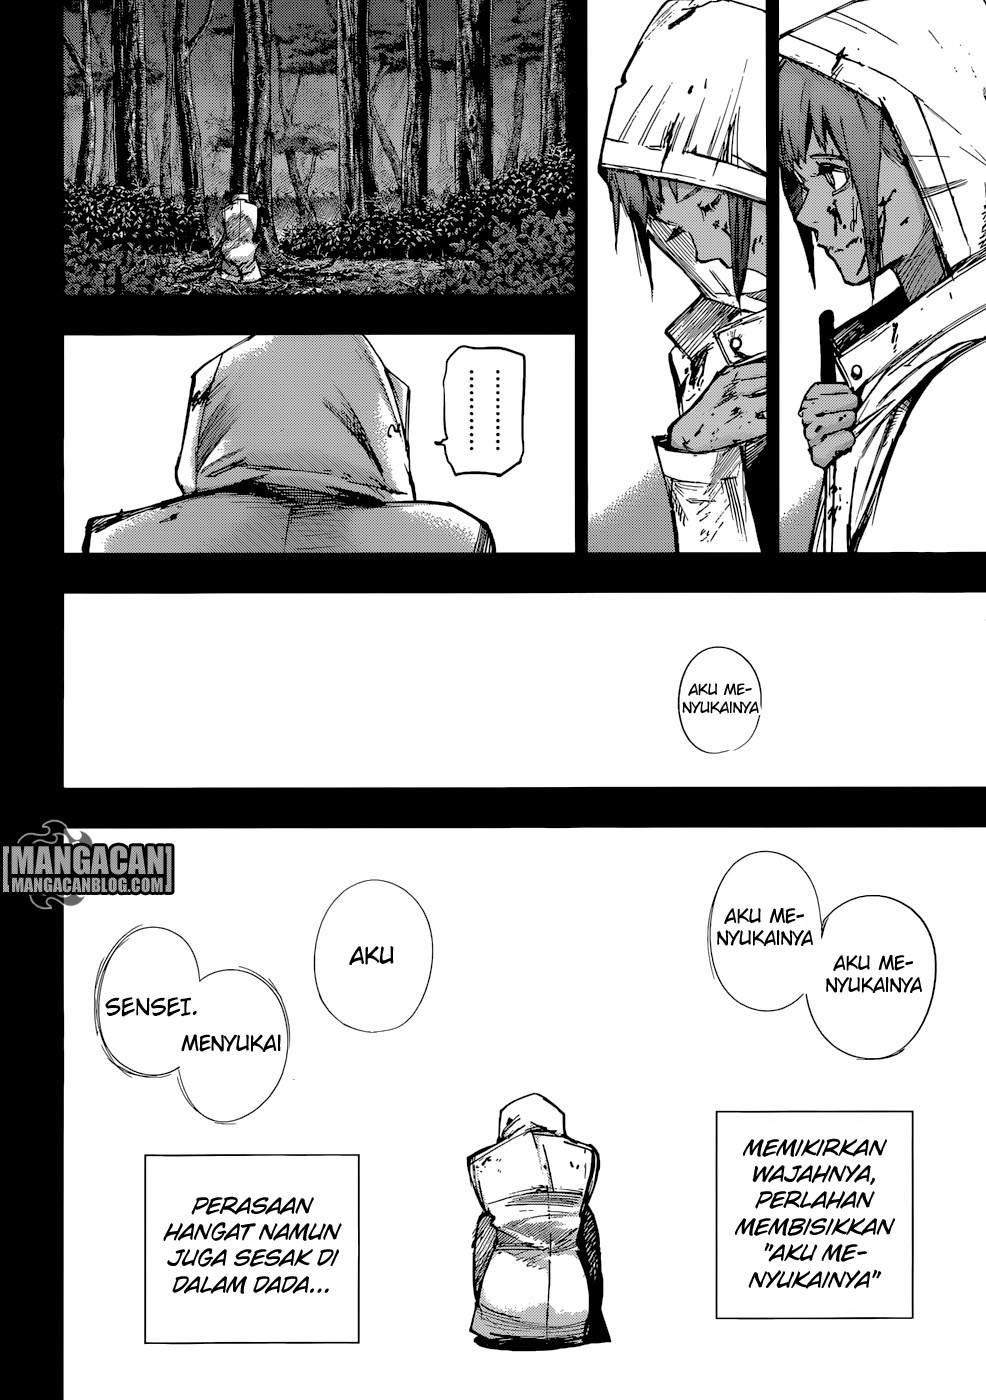 Tokyo Ghoul:re Chapter 114